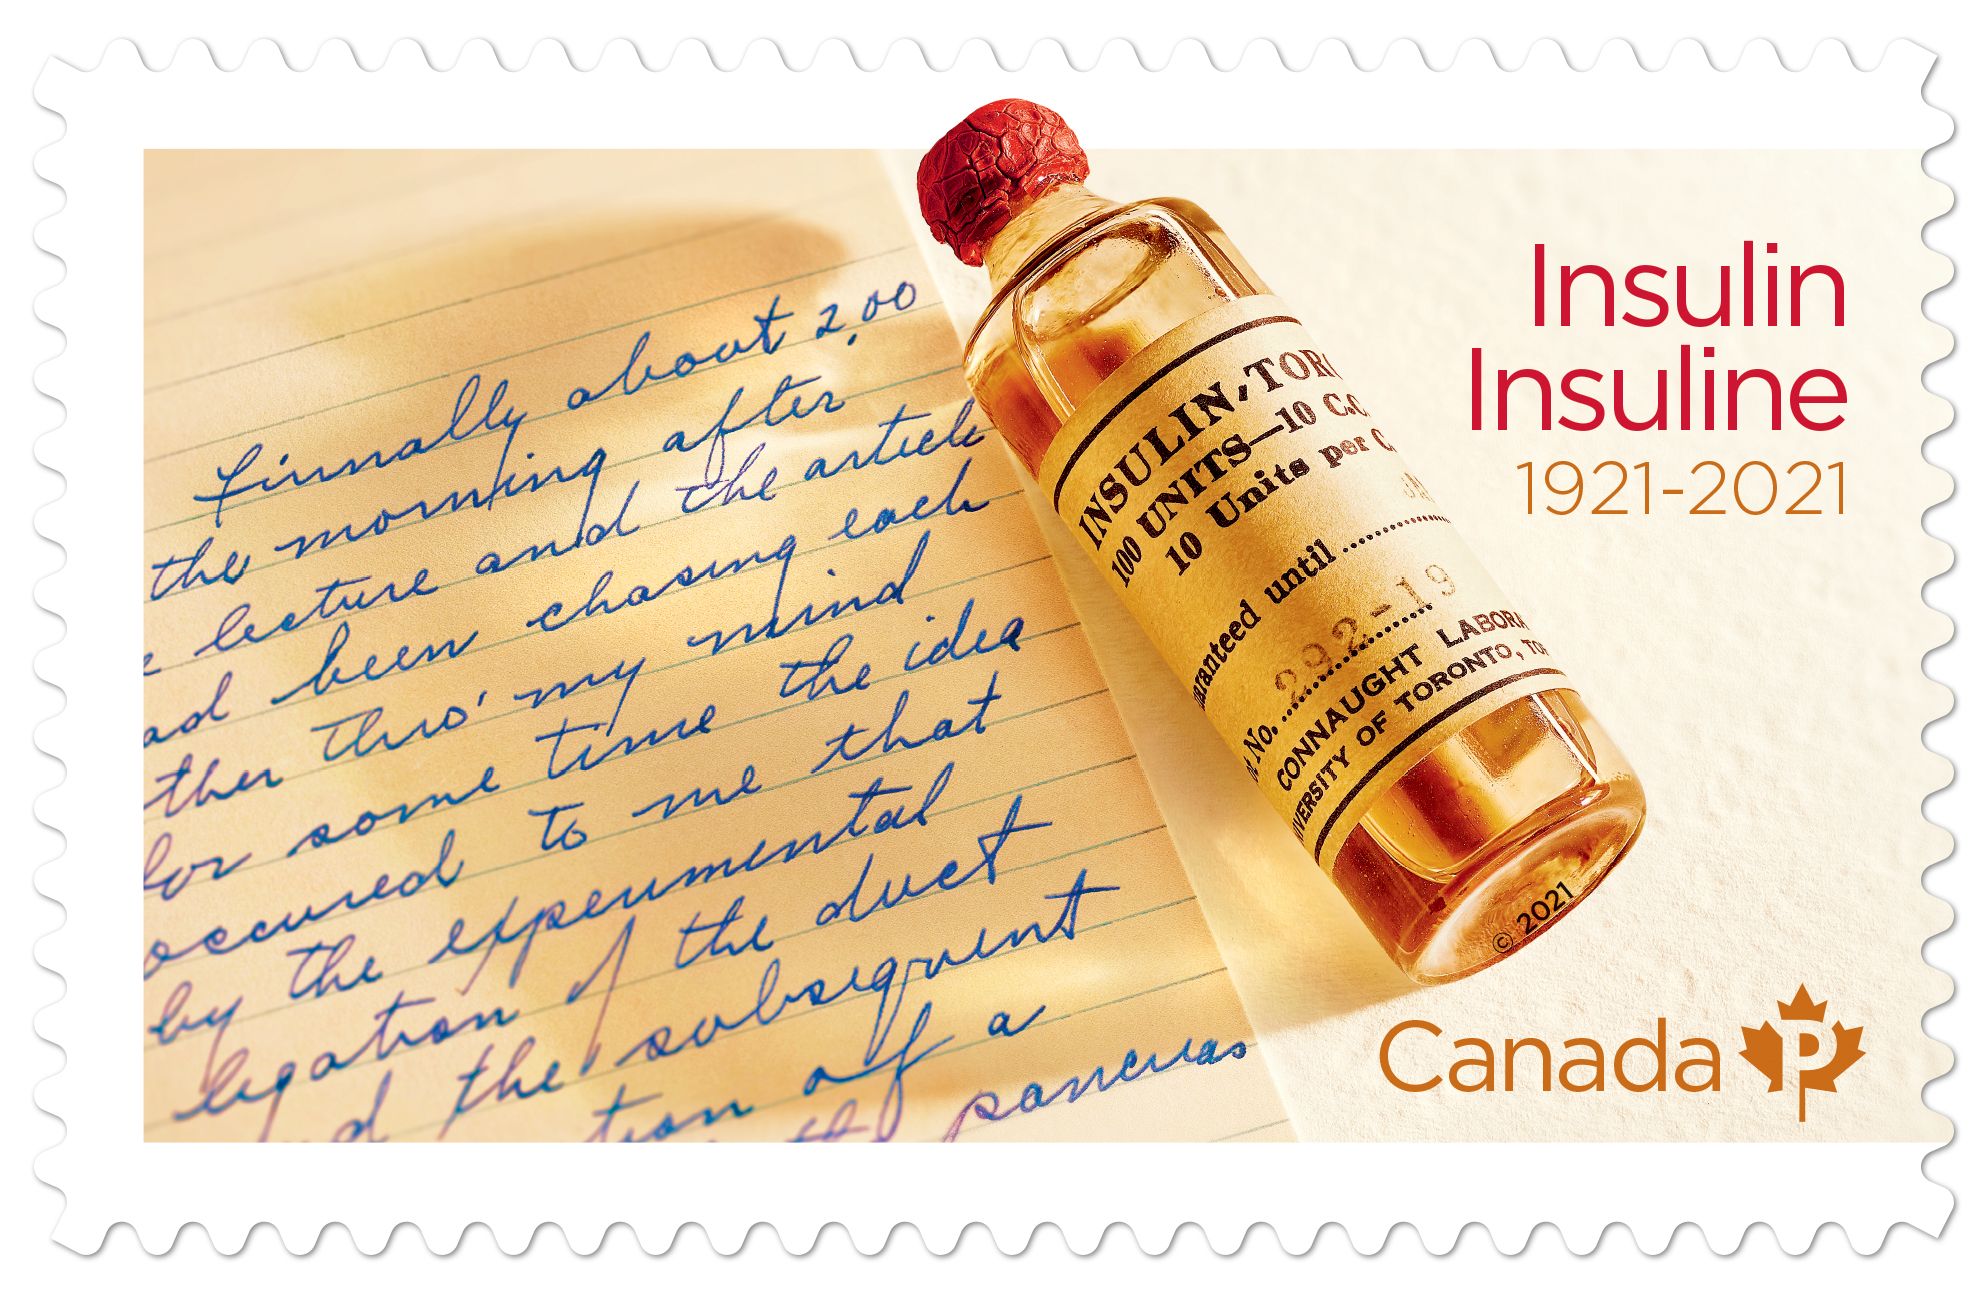 New stamp marks 100th anniversary of insulin's discovery - Canadian Stamp News